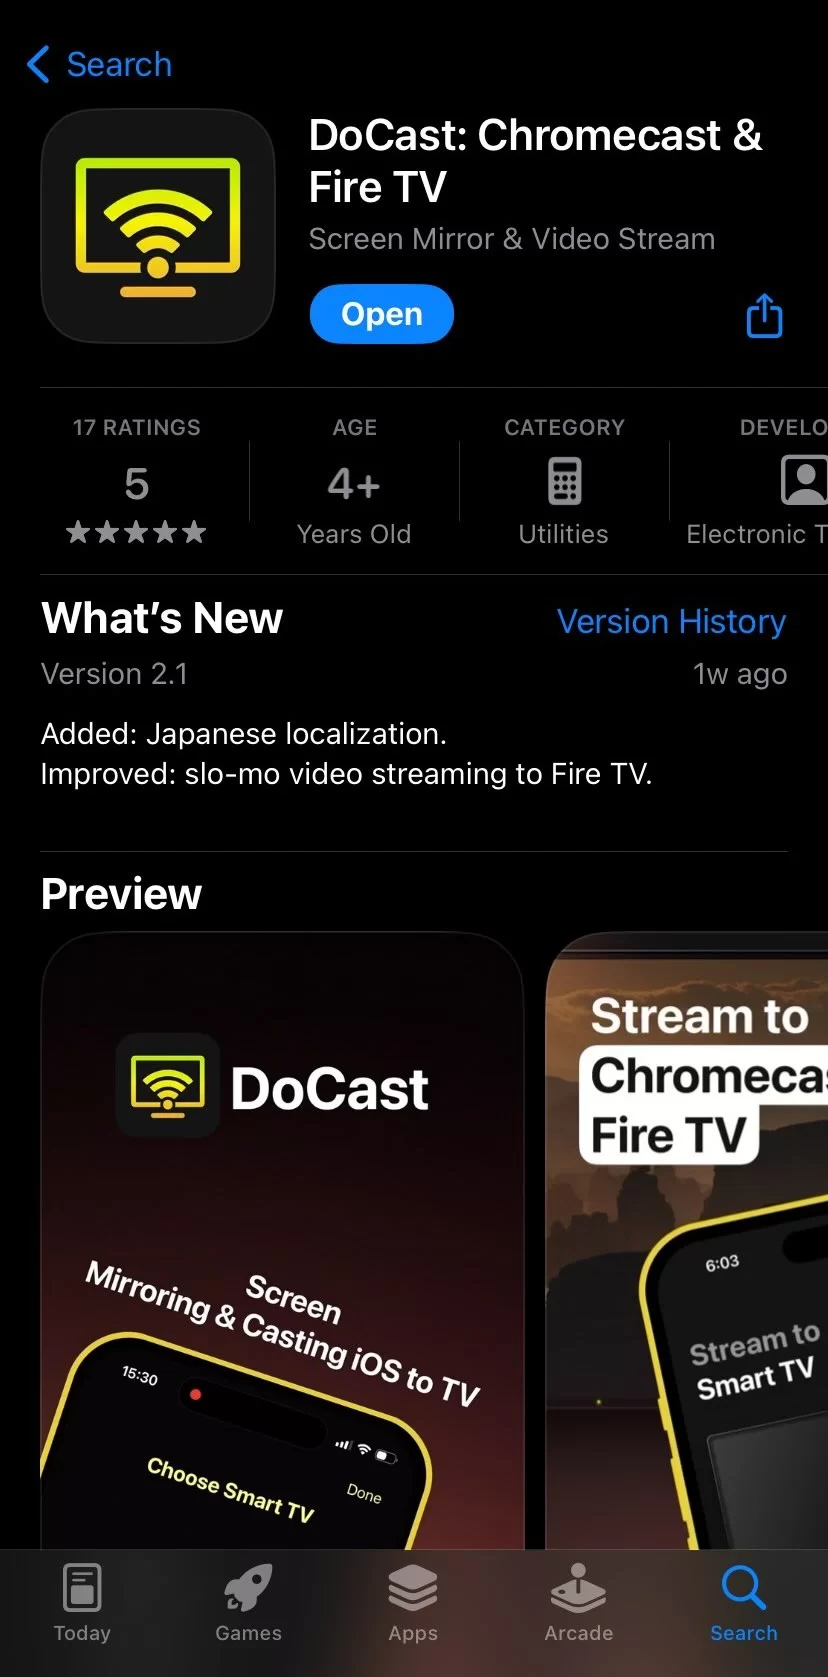 Find DoCast on the App Store and download it